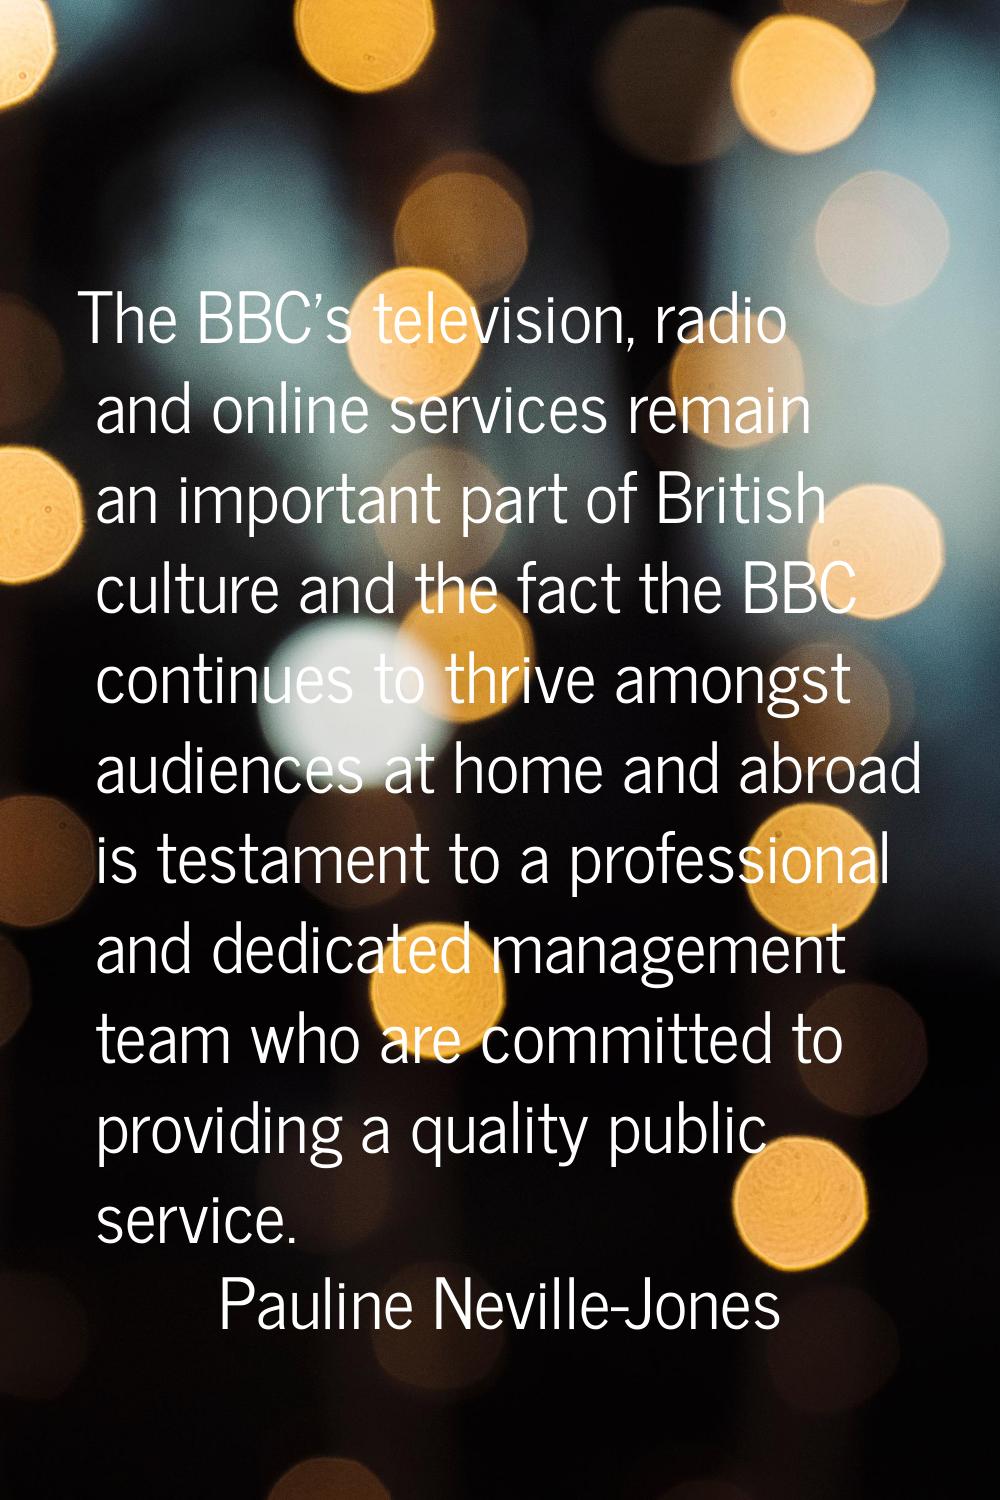 The BBC's television, radio and online services remain an important part of British culture and the